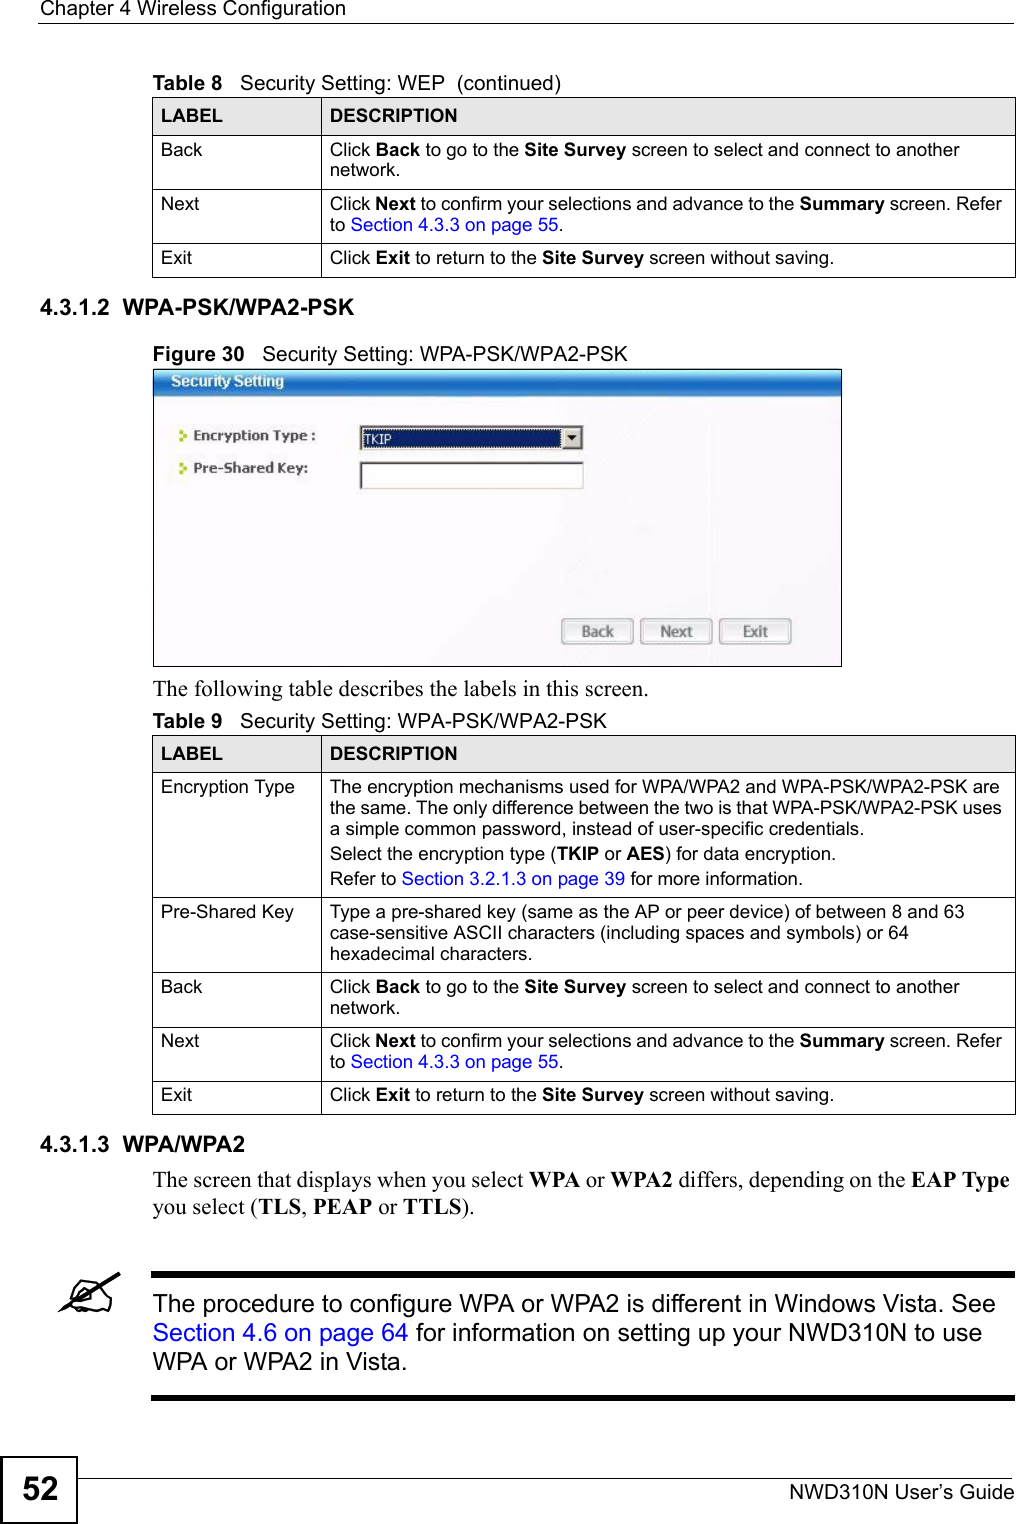 Chapter 4 Wireless ConfigurationNWD310N User’s Guide524.3.1.2  WPA-PSK/WPA2-PSKFigure 30   Security Setting: WPA-PSK/WPA2-PSKThe following table describes the labels in this screen. 4.3.1.3  WPA/WPA2The screen that displays when you select WPA or WPA2 differs, depending on the EAP Type you select (TLS, PEAP or TTLS).&quot;The procedure to configure WPA or WPA2 is different in Windows Vista. See Section 4.6 on page 64 for information on setting up your NWD310N to use WPA or WPA2 in Vista.Back Click Back to go to the Site Survey screen to select and connect to another network.Next Click Next to confirm your selections and advance to the Summary screen. Refer to Section 4.3.3 on page 55. Exit Click Exit to return to the Site Survey screen without saving.Table 8   Security Setting: WEP  (continued)LABEL DESCRIPTIONTable 9   Security Setting: WPA-PSK/WPA2-PSKLABEL DESCRIPTIONEncryption Type The encryption mechanisms used for WPA/WPA2 and WPA-PSK/WPA2-PSK are the same. The only difference between the two is that WPA-PSK/WPA2-PSK uses a simple common password, instead of user-specific credentials.Select the encryption type (TKIP or AES) for data encryption.Refer to Section 3.2.1.3 on page 39 for more information.Pre-Shared Key Type a pre-shared key (same as the AP or peer device) of between 8 and 63 case-sensitive ASCII characters (including spaces and symbols) or 64 hexadecimal characters.Back Click Back to go to the Site Survey screen to select and connect to another network.Next Click Next to confirm your selections and advance to the Summary screen. Refer to Section 4.3.3 on page 55. Exit Click Exit to return to the Site Survey screen without saving.